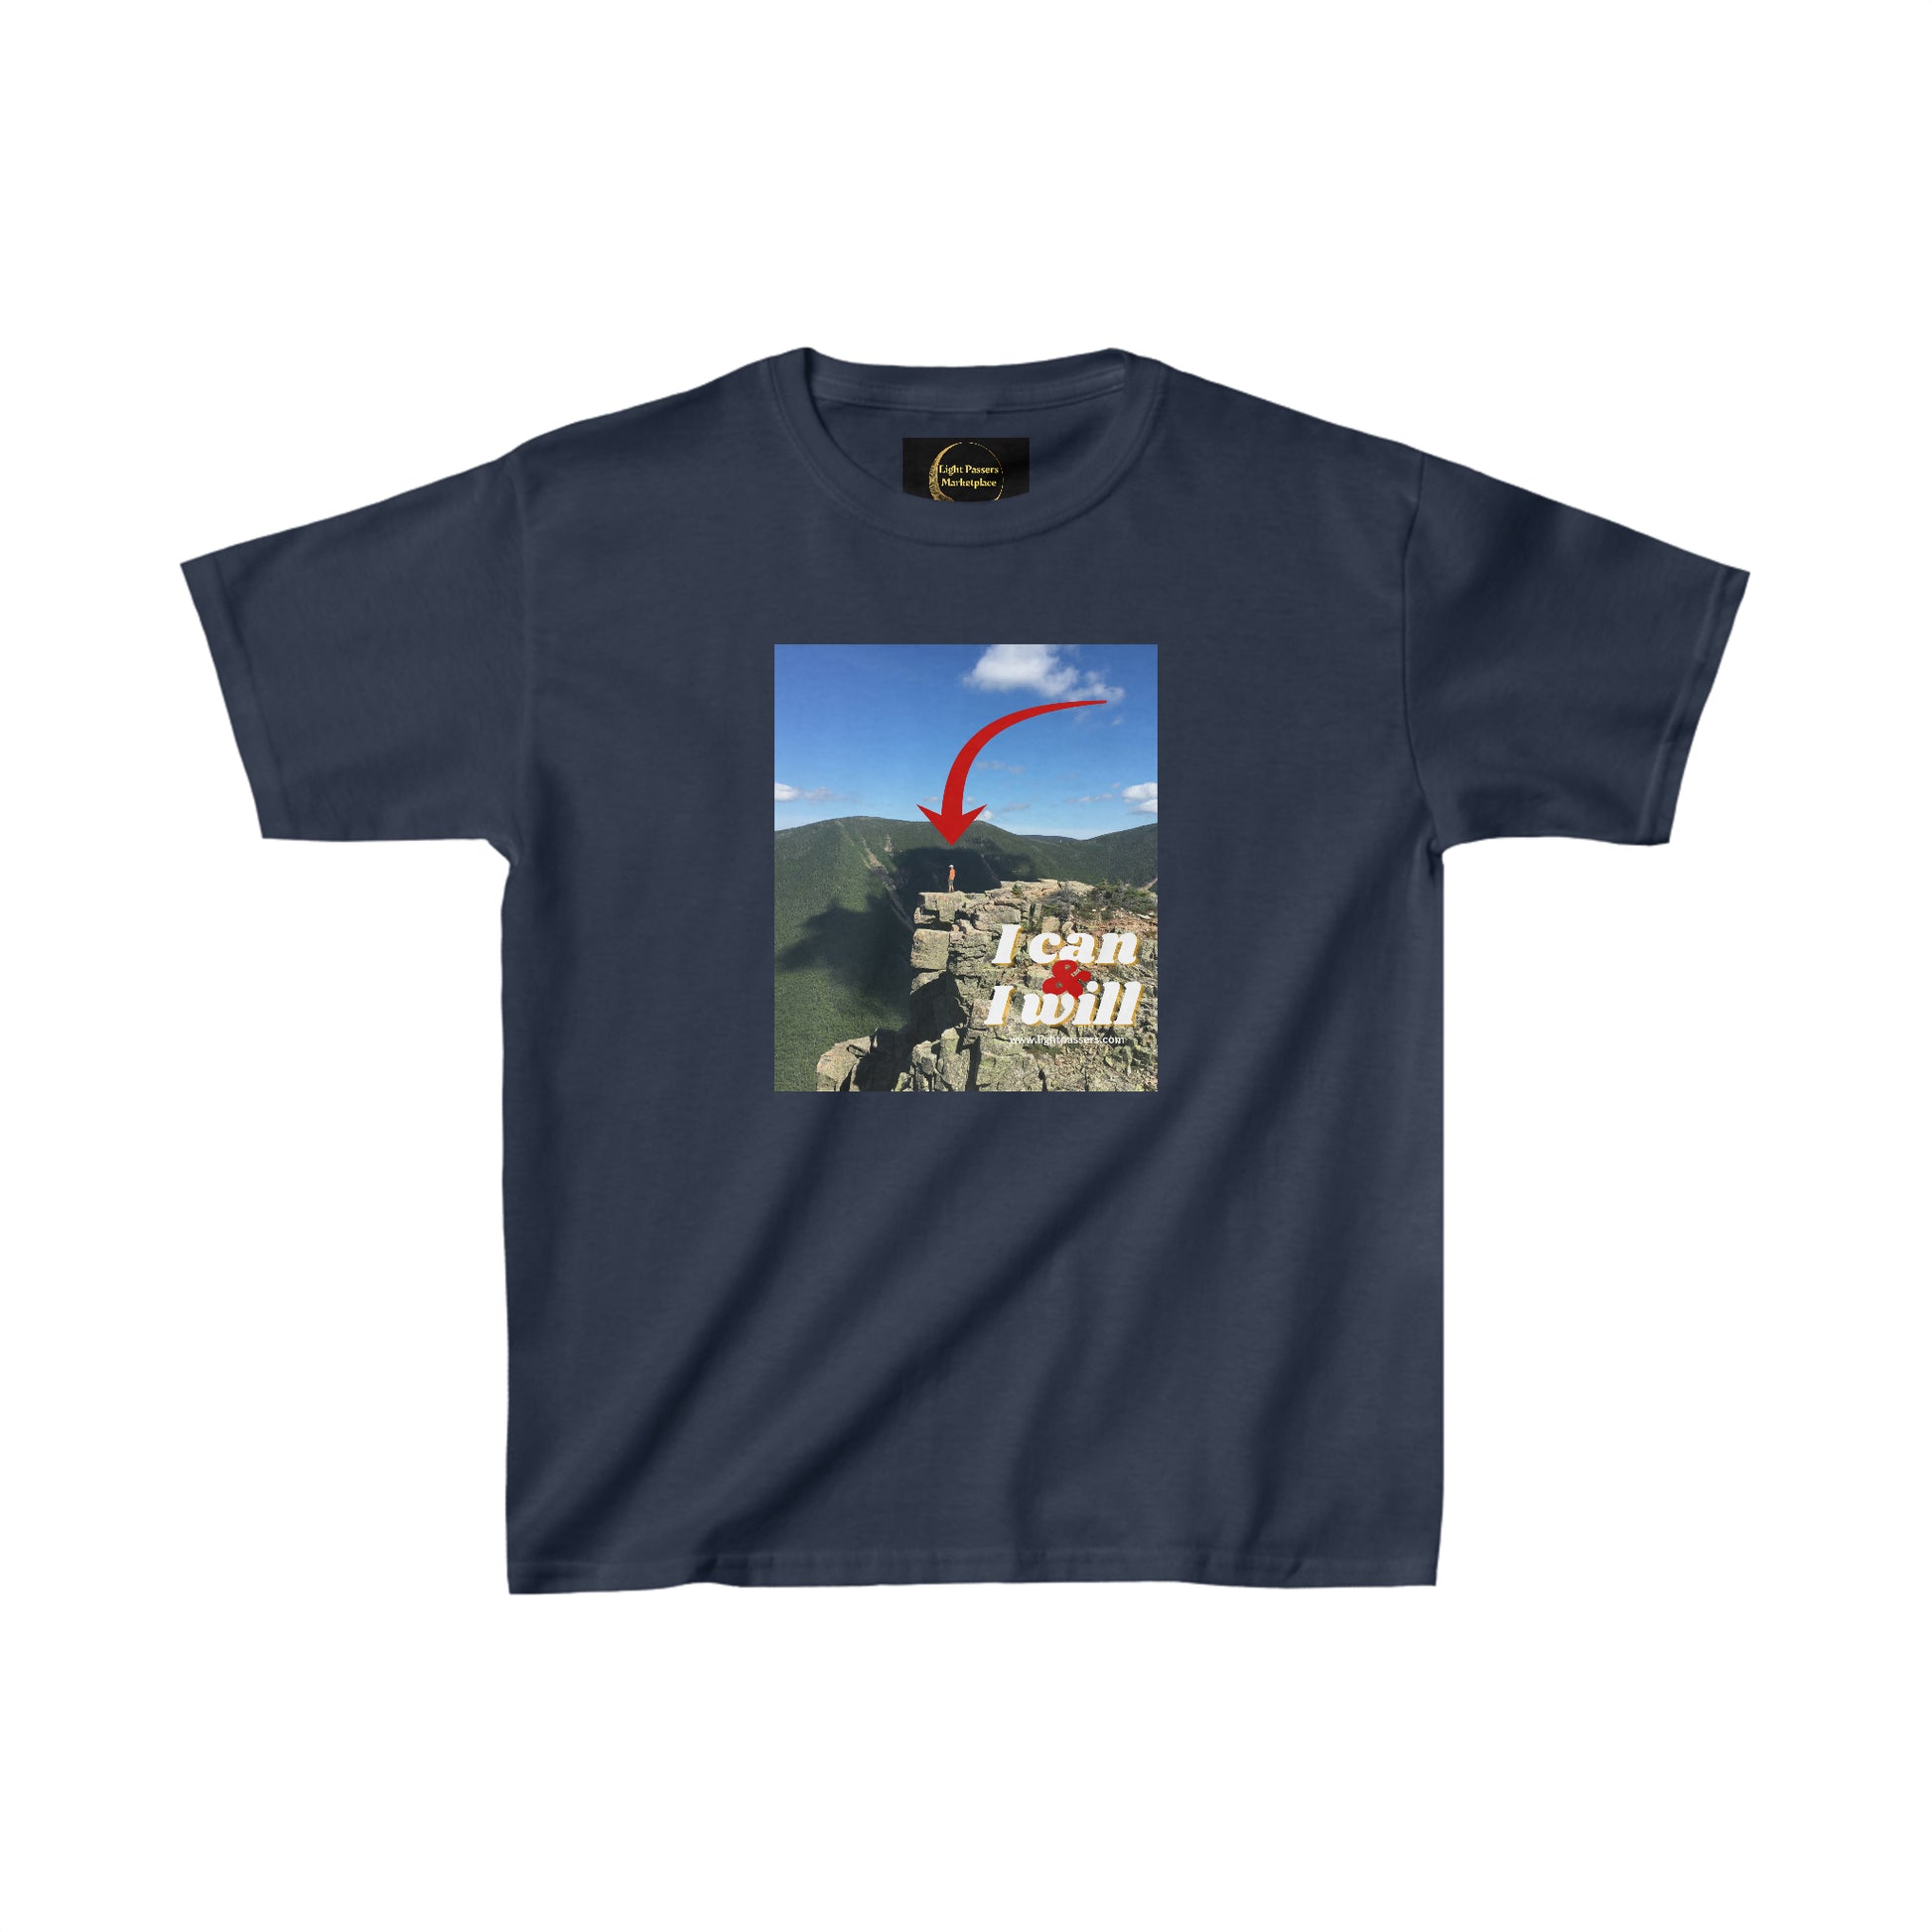 Youth t-shirt featuring a mountain and red arrow design, made of 100% cotton with twill tape shoulders for durability. Classic fit, tear-away labels, ethically sourced US cotton.